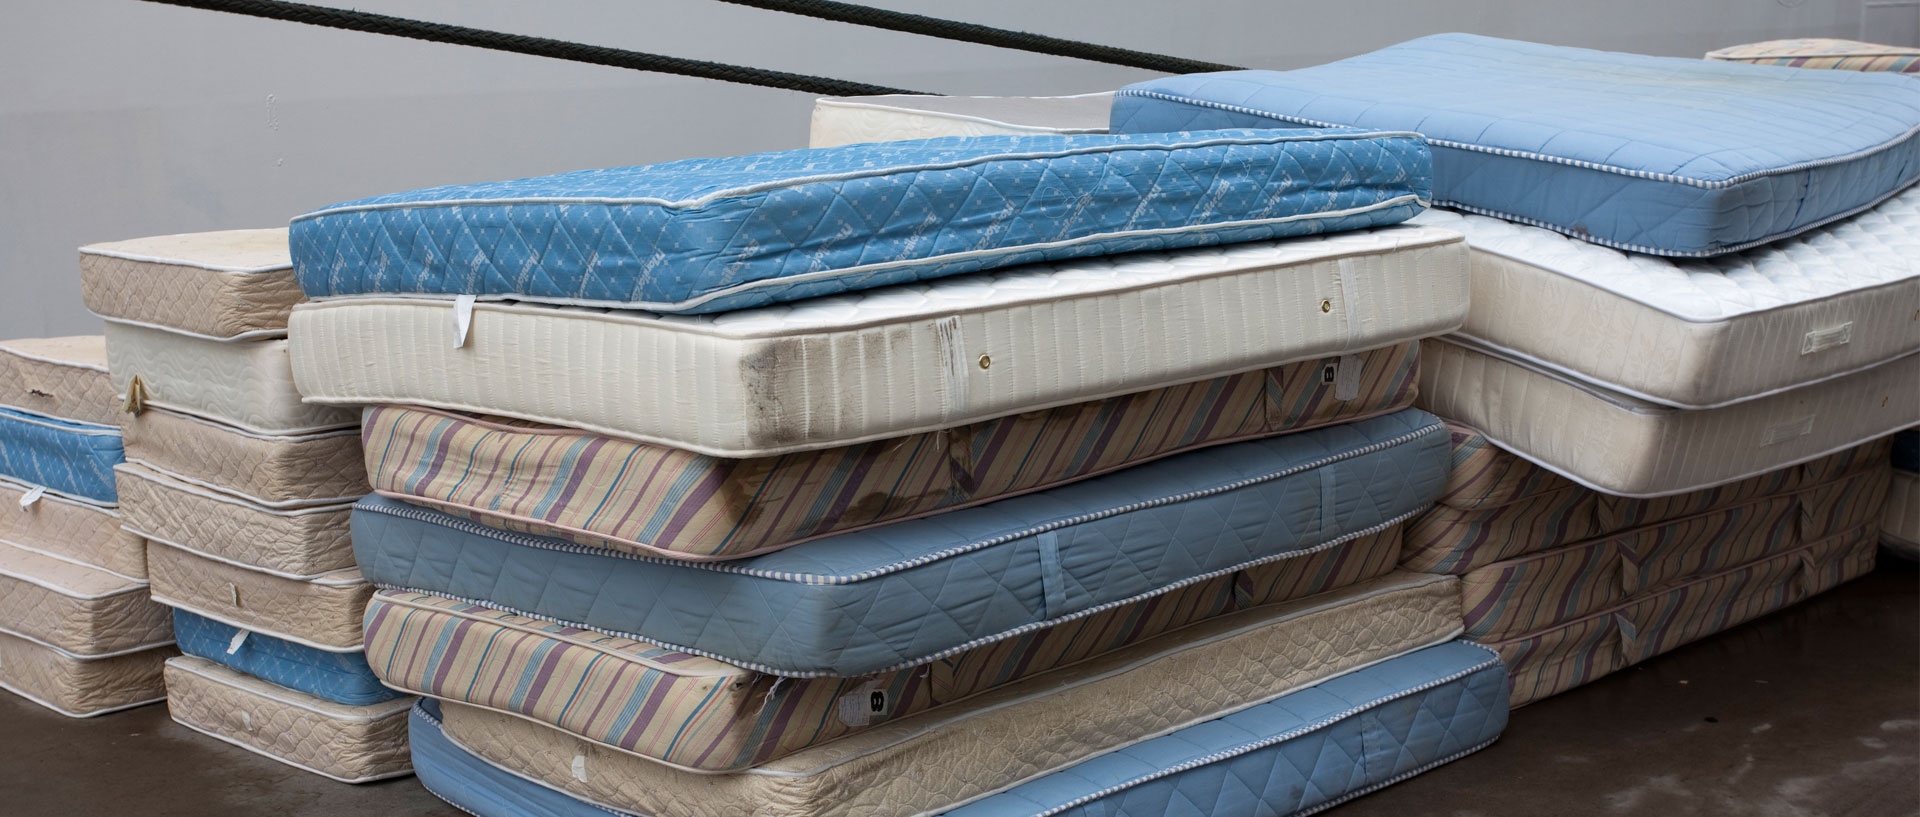 is it legal to sell refurbished bed mattresses